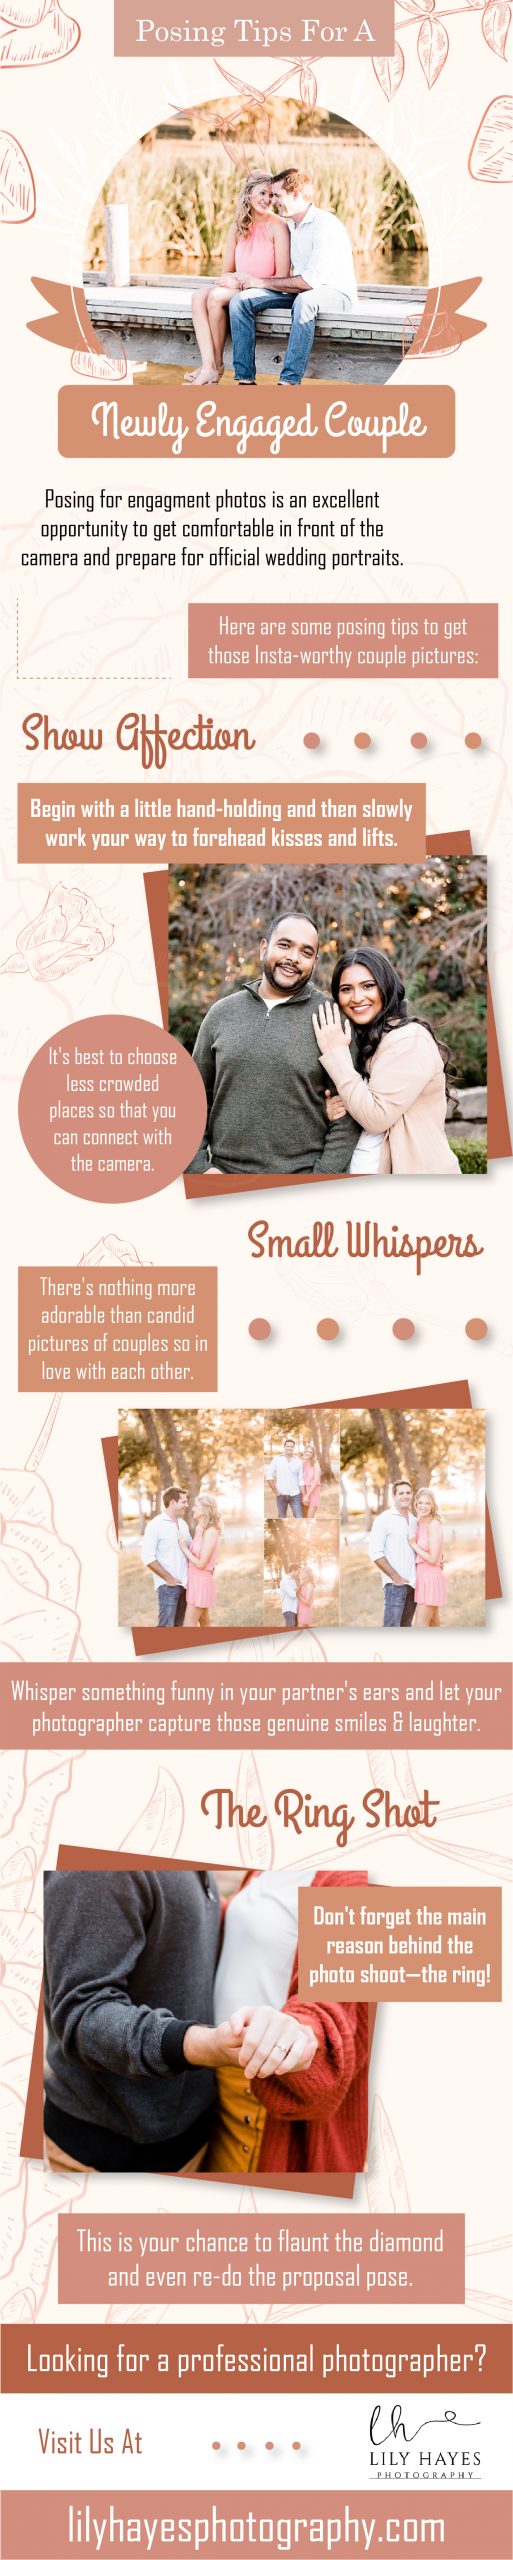 Posing-tips-for-newly-engaged-couple